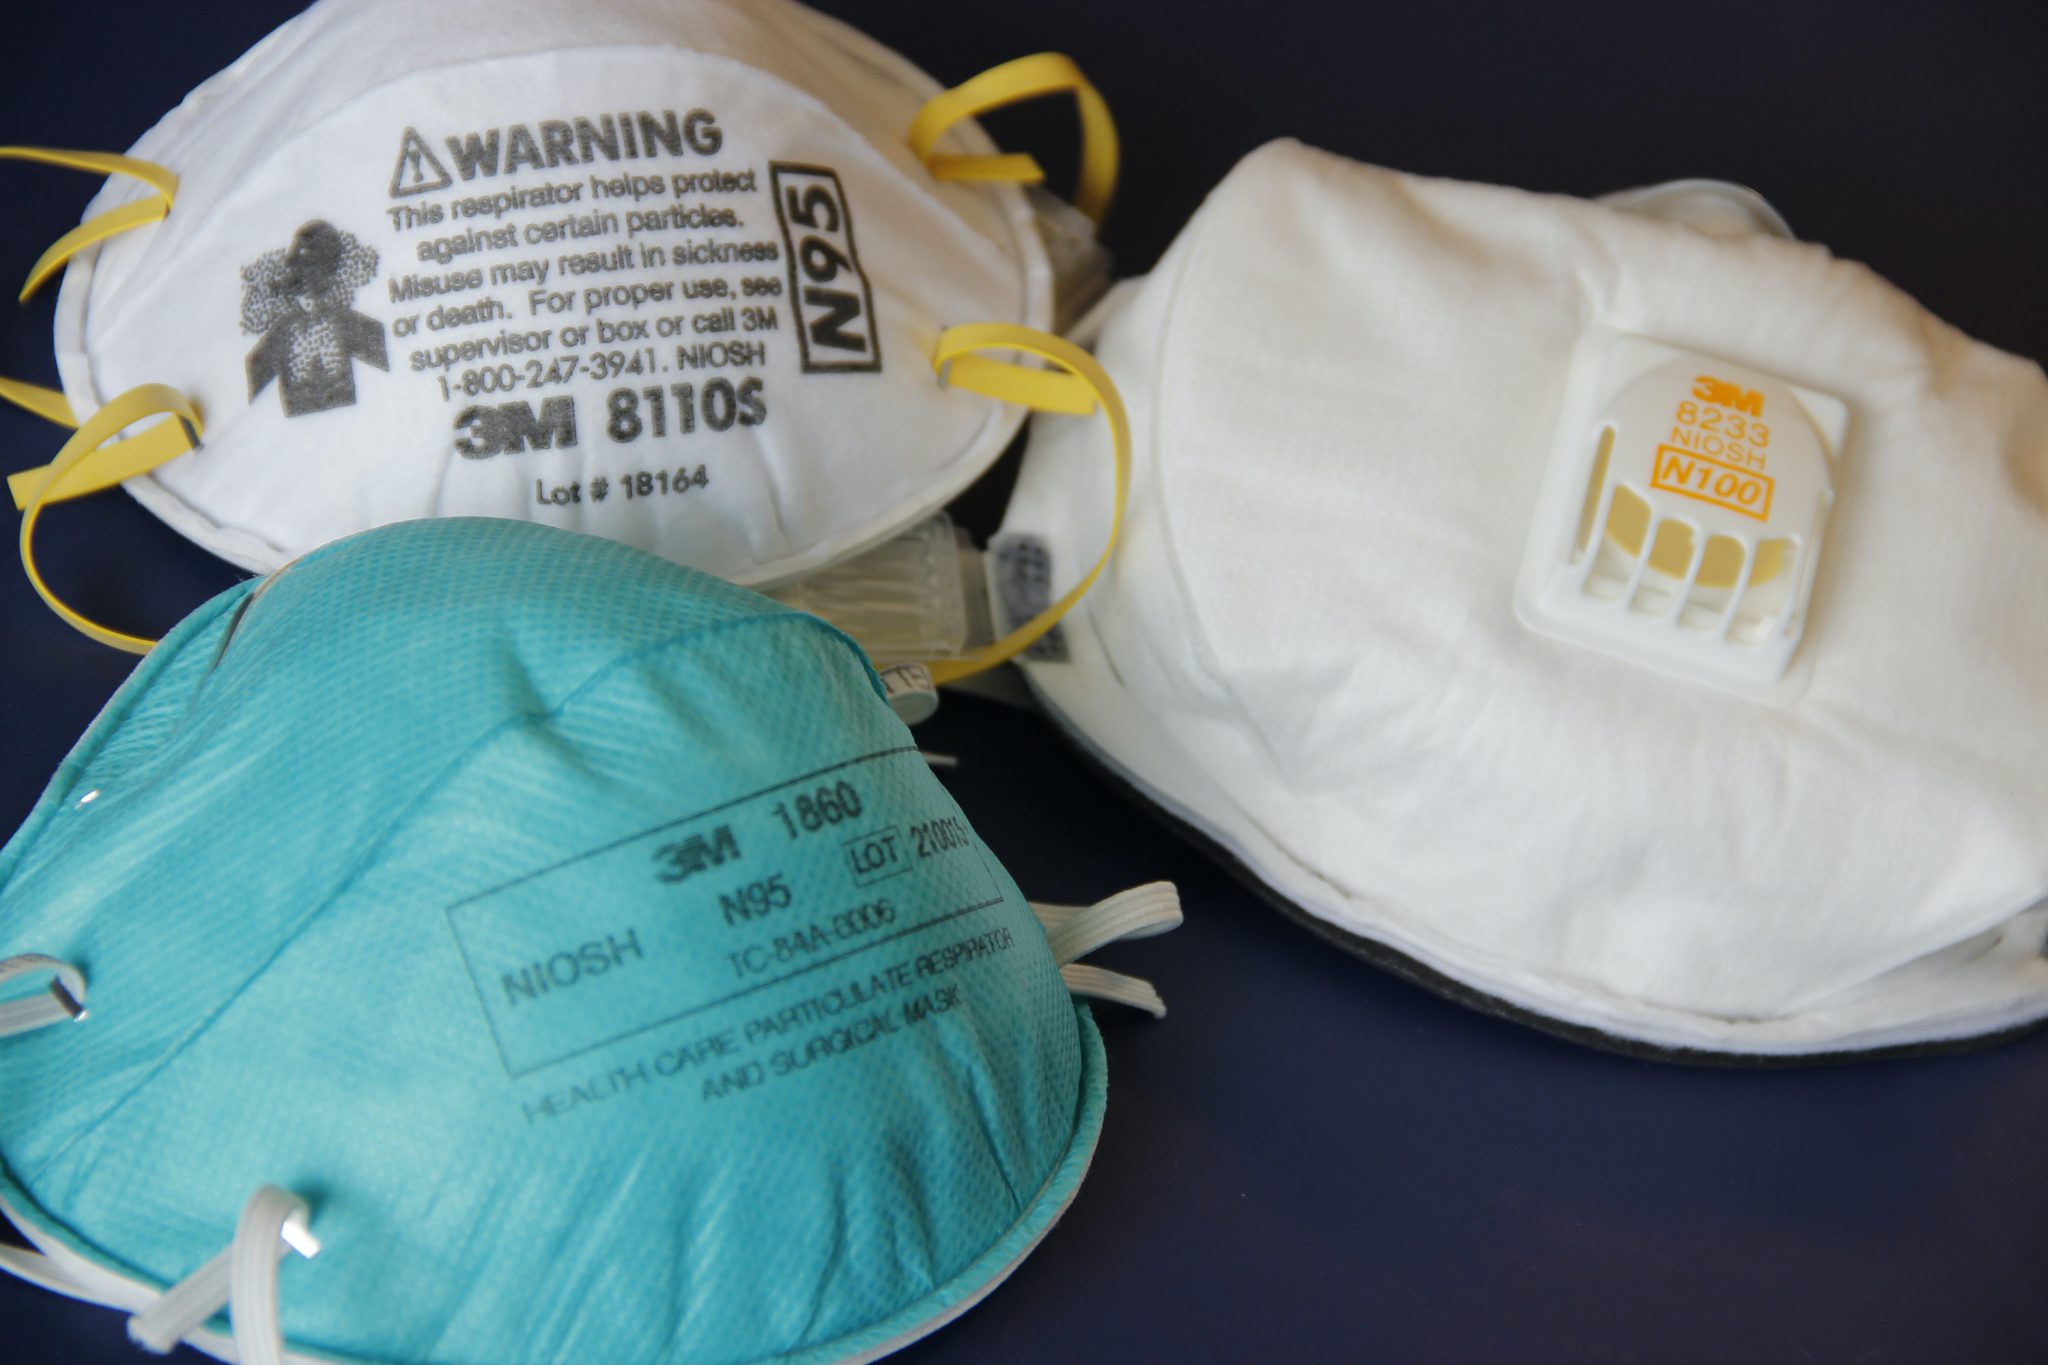 Personal protective equipment like N95 masks (shown here) are in short supply for most departments.